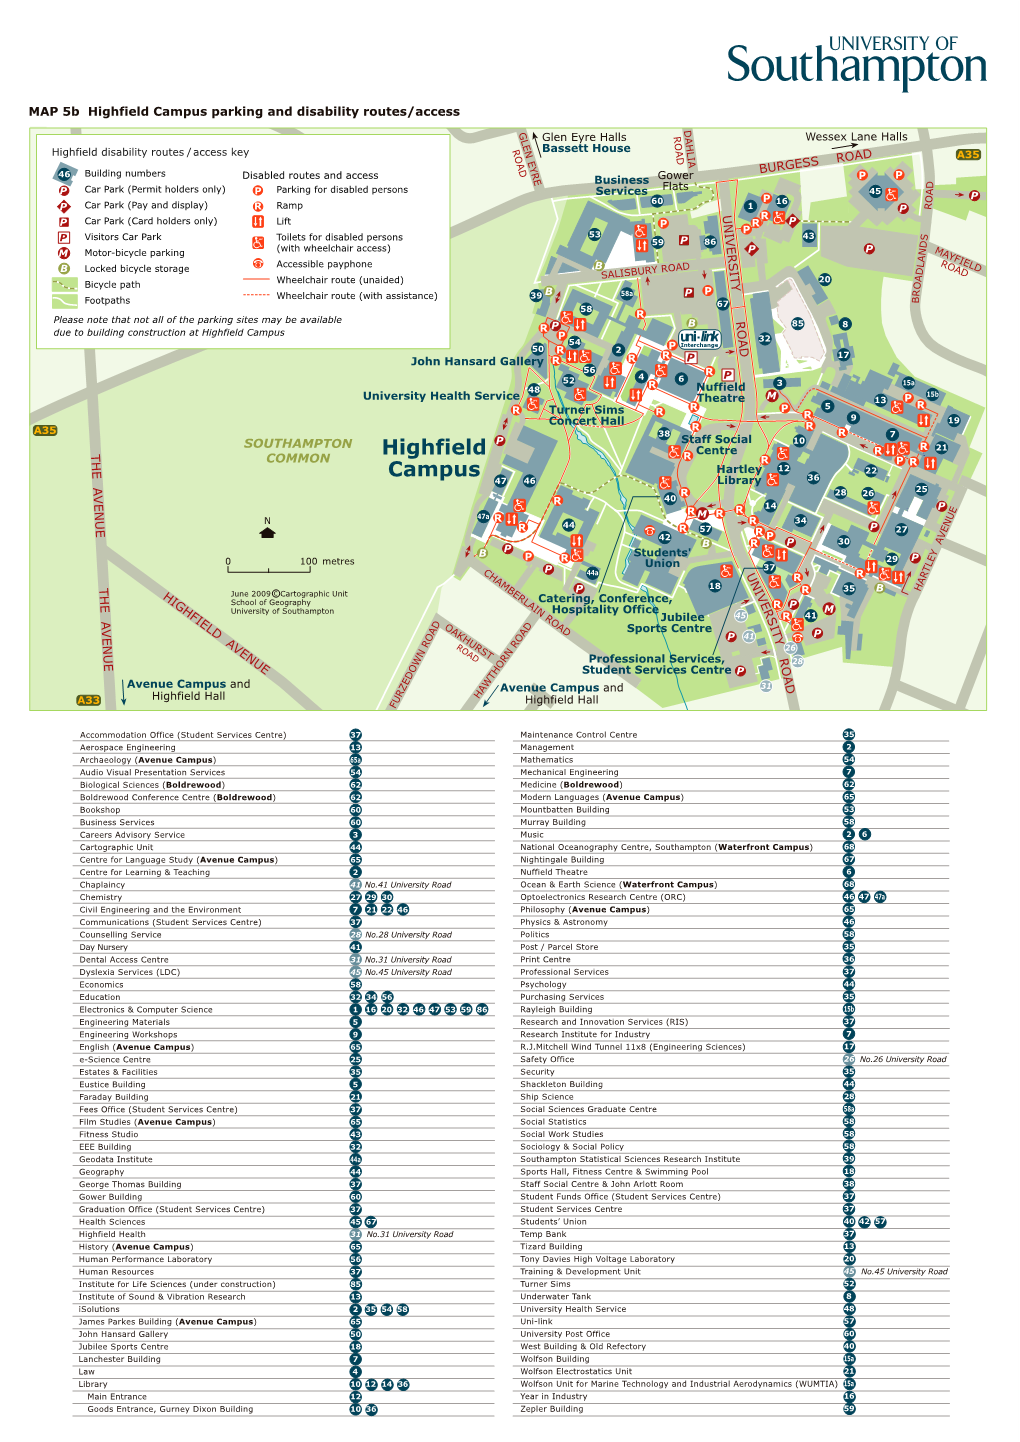 Highfield Campus Parking and Disability Routes/Access